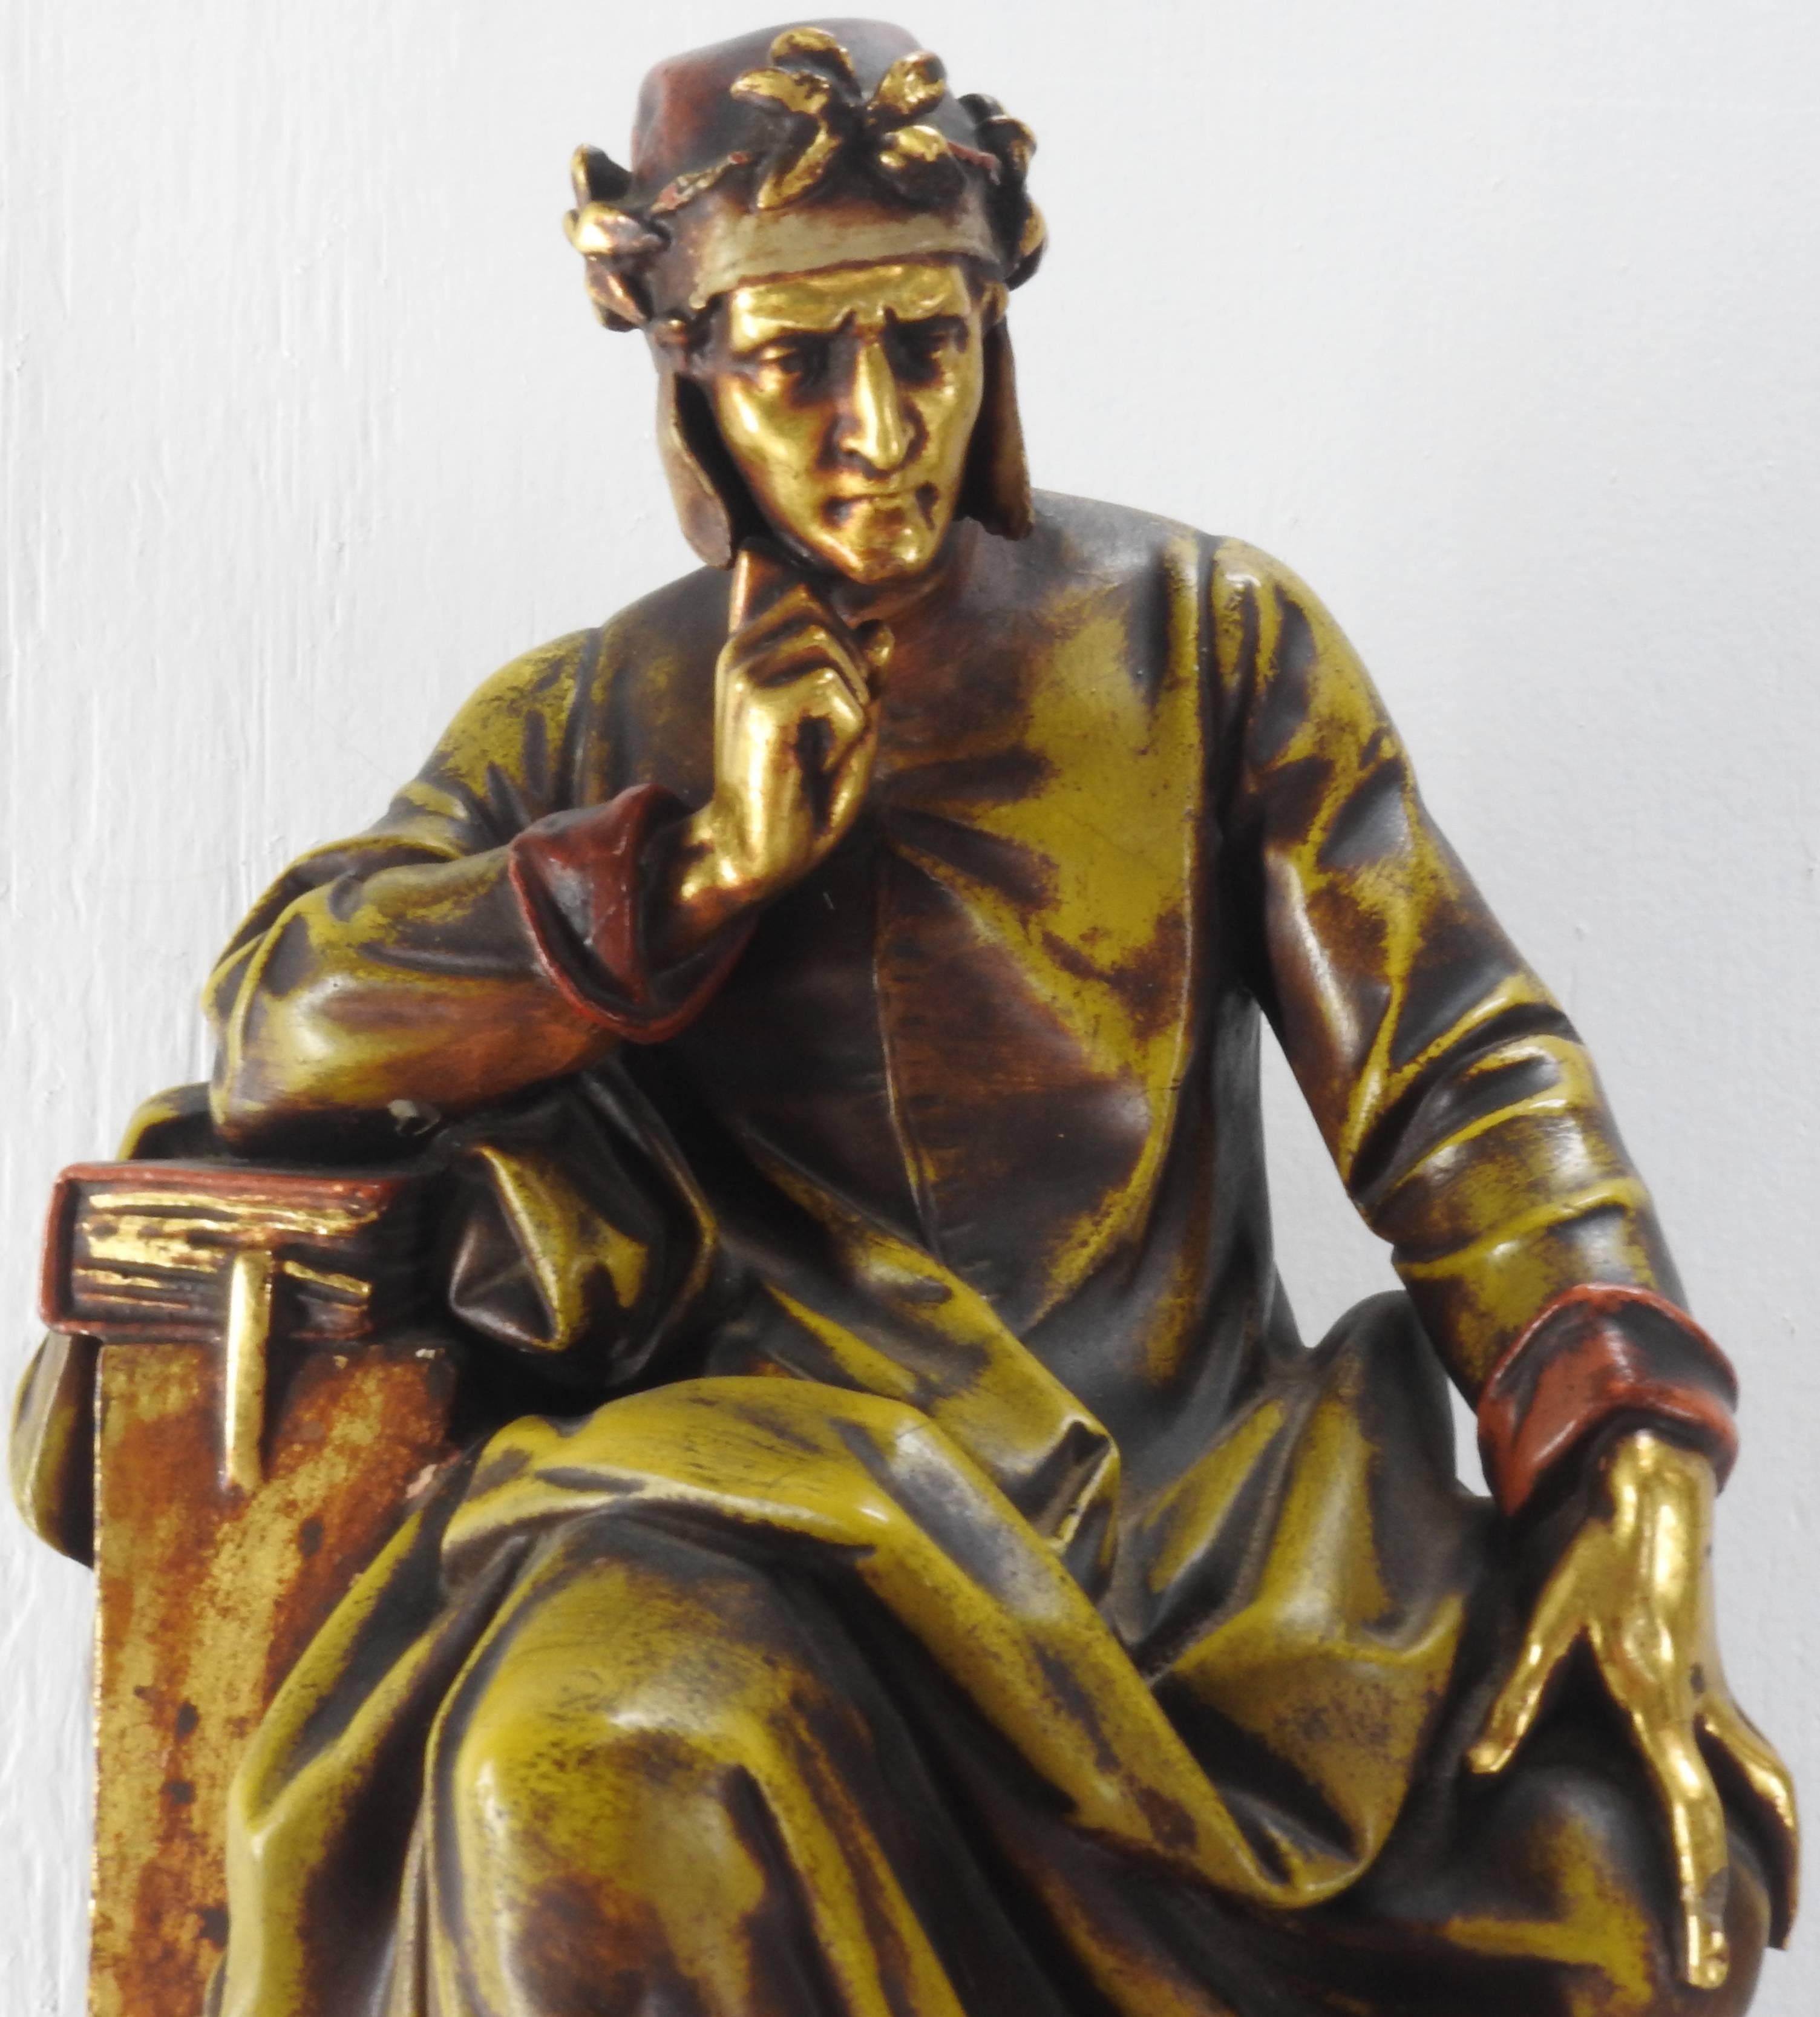 Shades of gold gilt and red decorate this Dante statue of a gentleman on a pedestal, perched on a book and he obviously has something on his mind. His flowing red cap is embellished with a ring of flowers. He is made of terracotta.